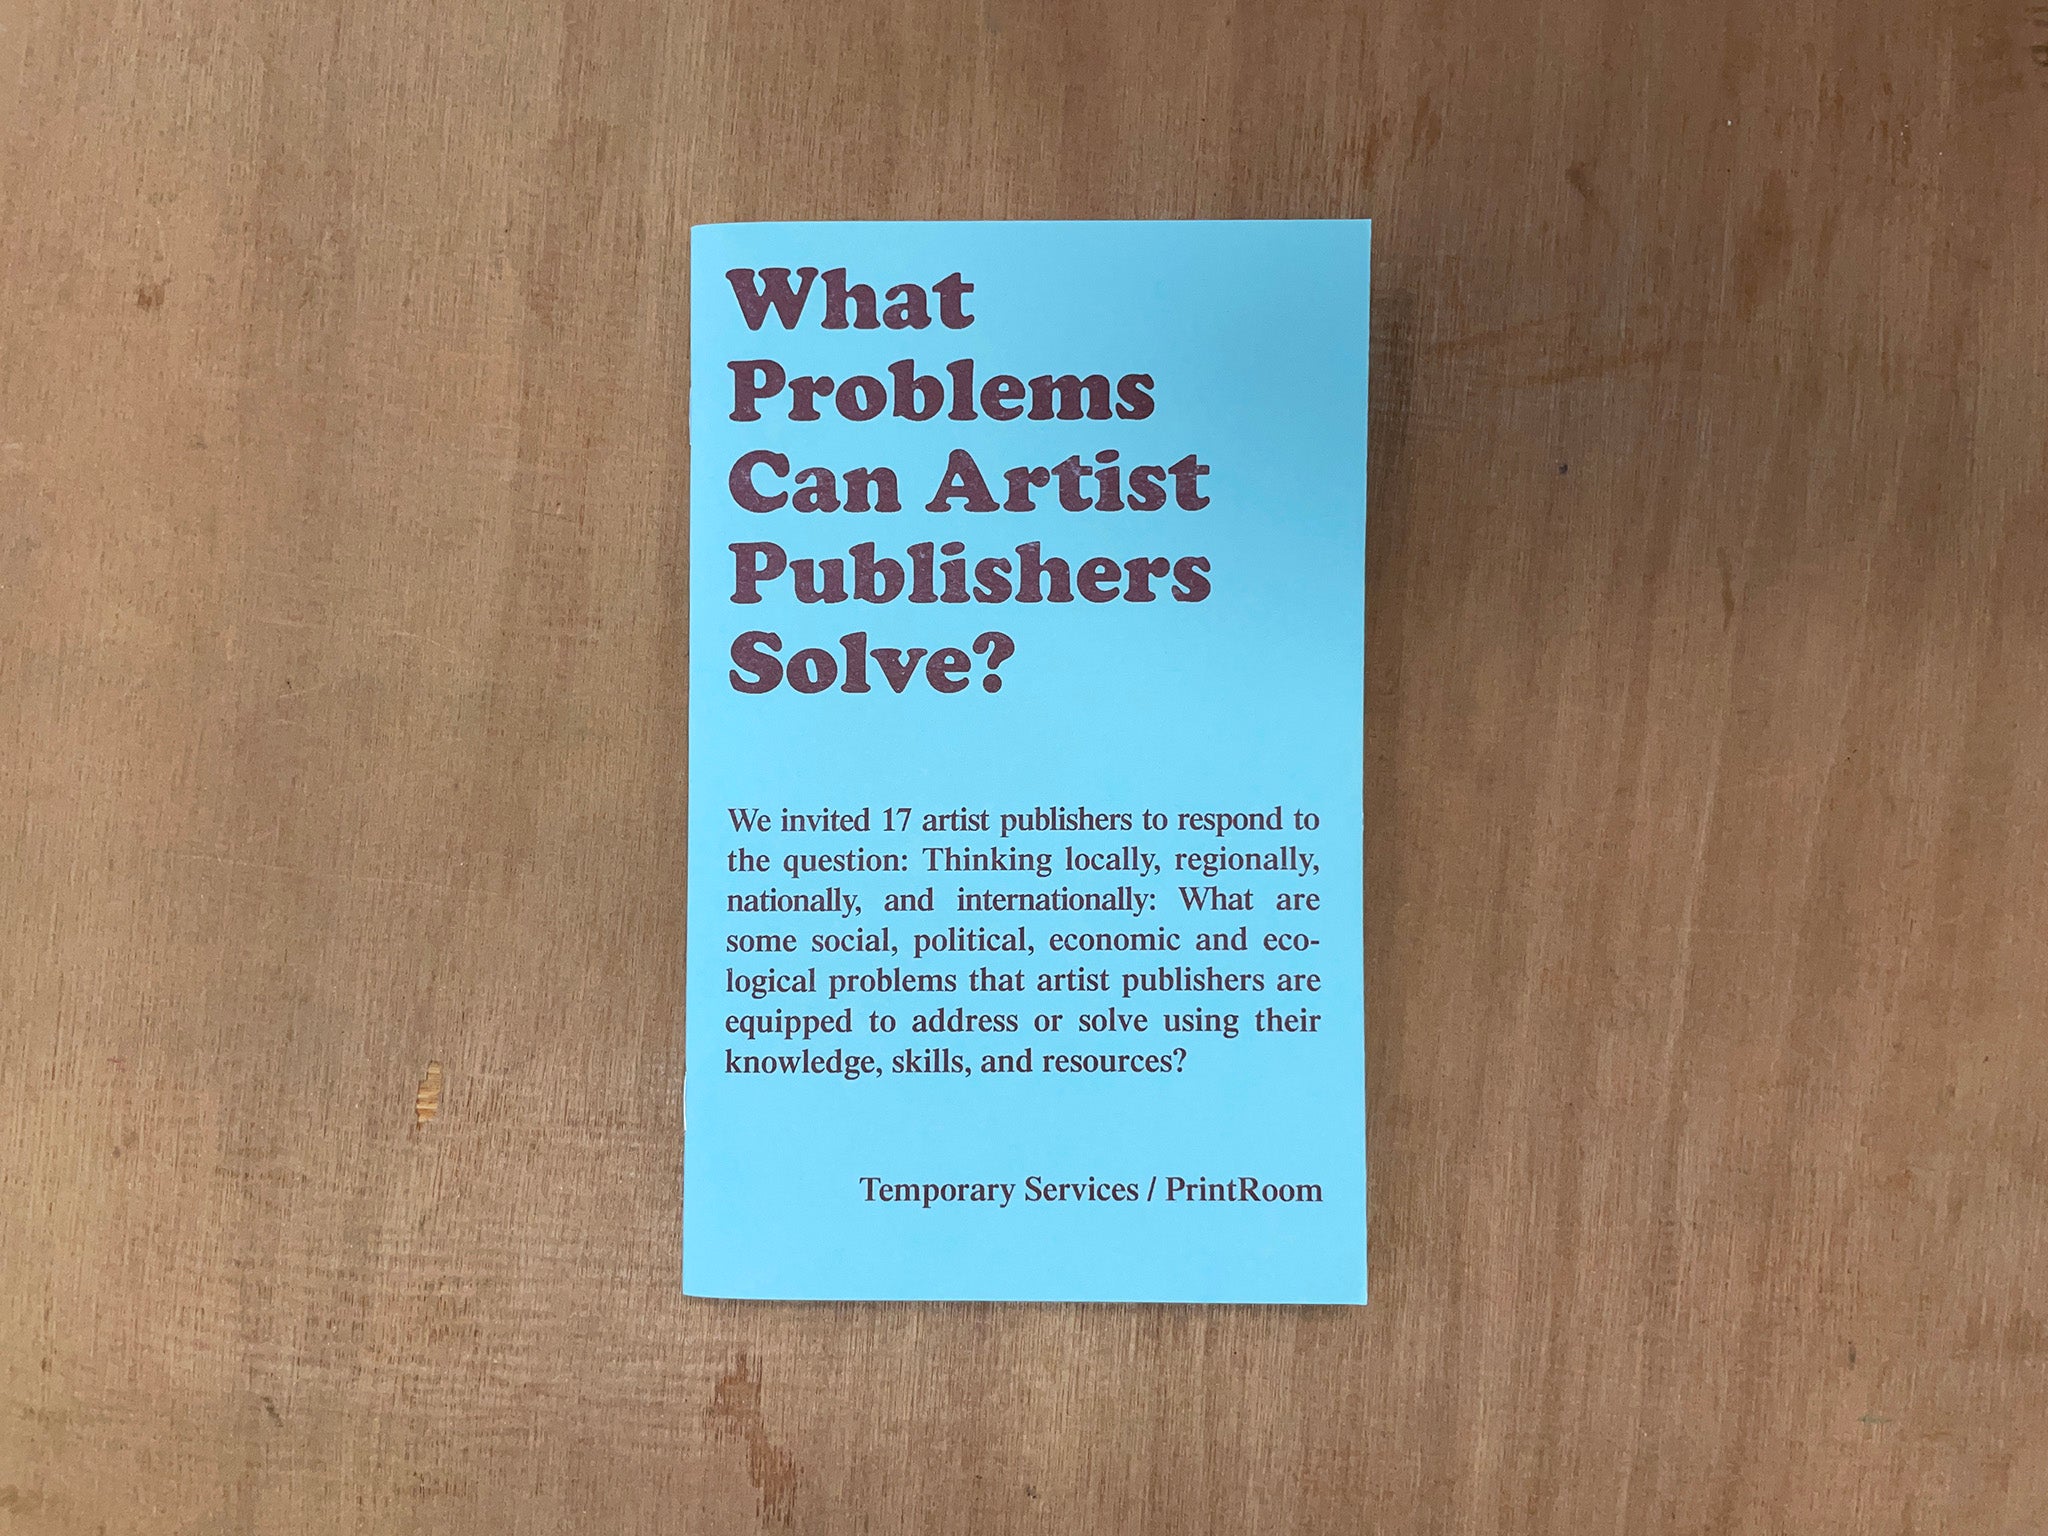 WHAT PROBLEMS CAN ARTIST PUBLISHERS SOLVE? by Various Artists